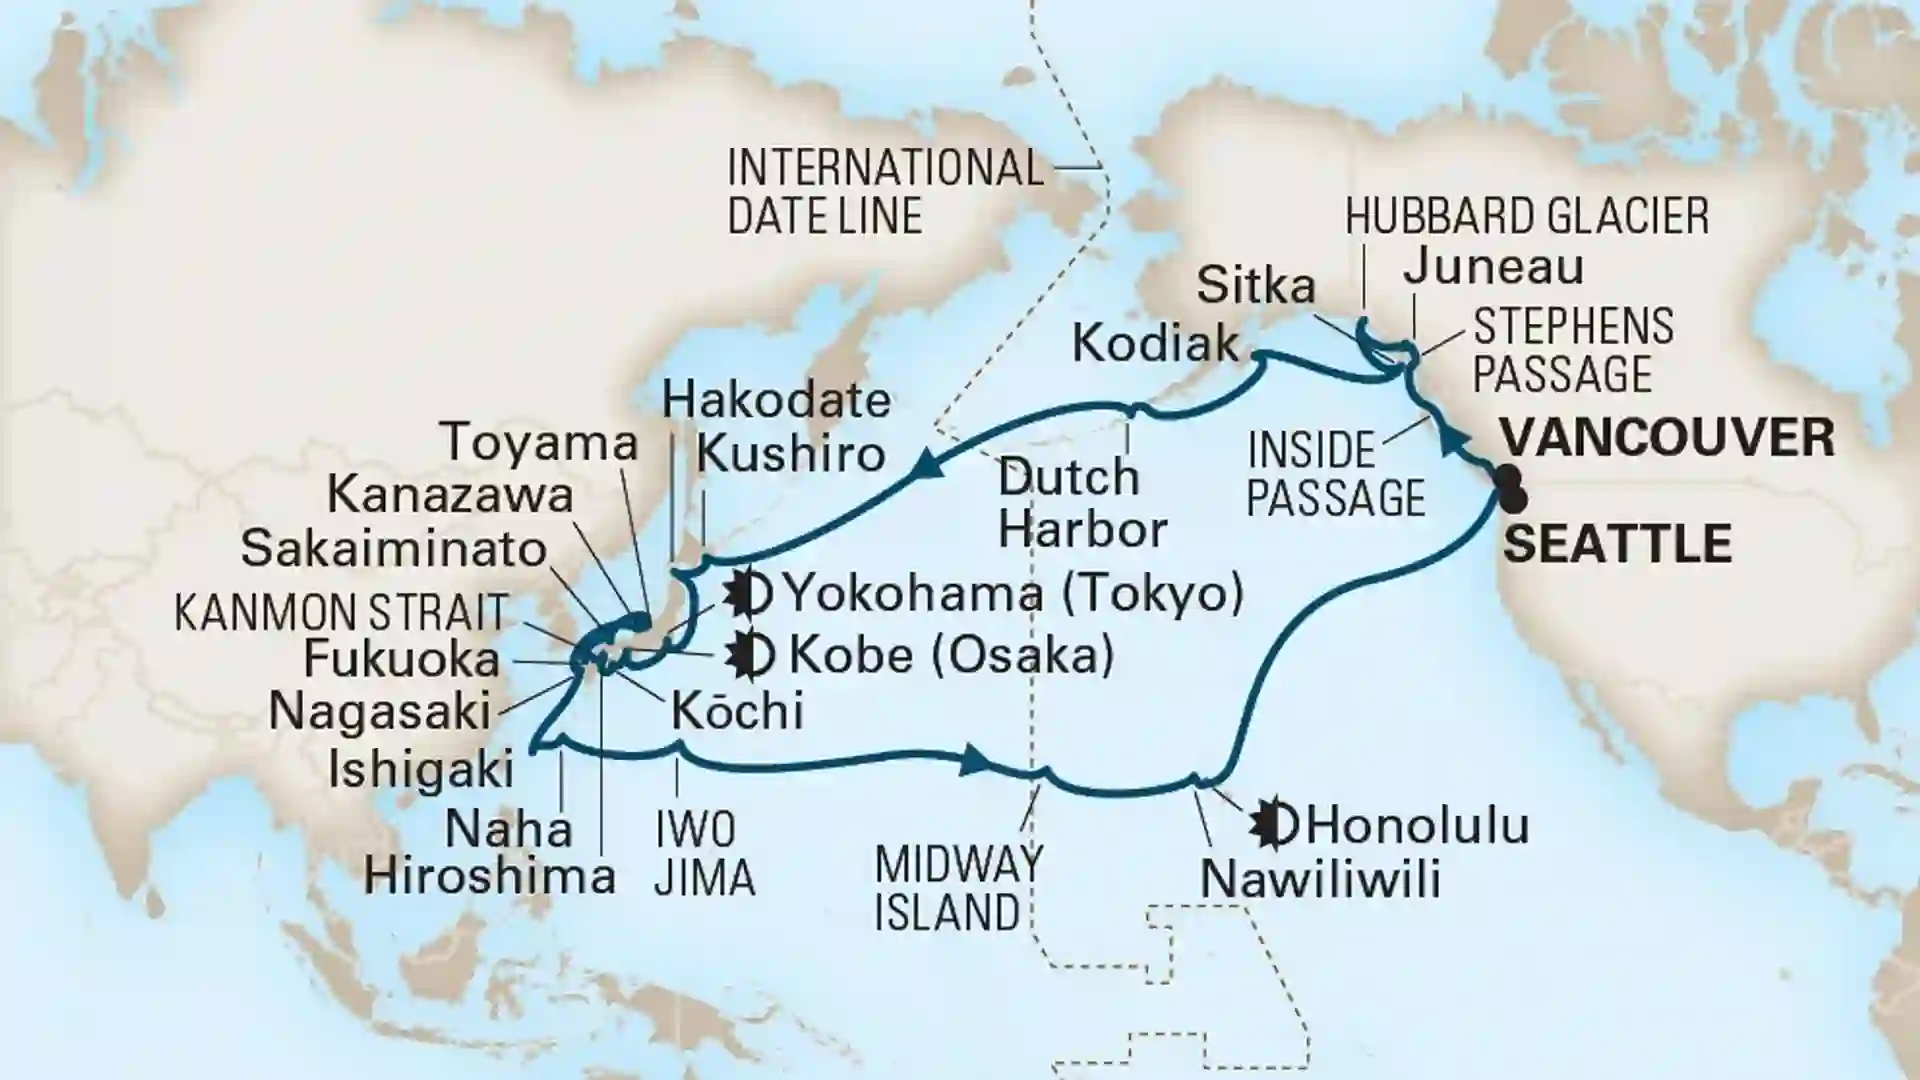 Map showing path of cruise from Seattle to and from Japan.